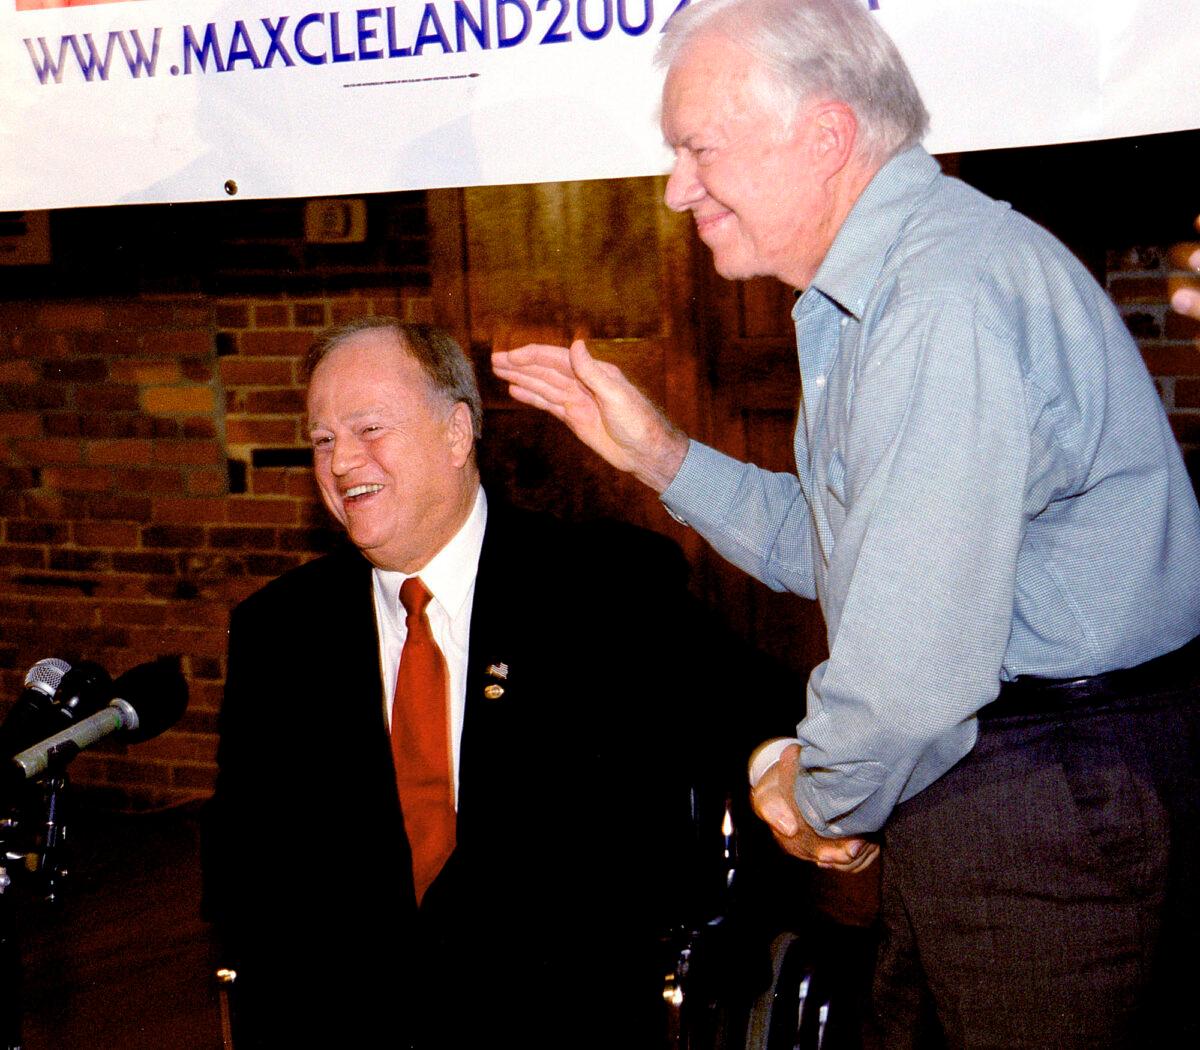 Former President Jimmy Carter (R) gives U.S. Sen. Max Cleland (D-Ga.) a standing ovation during Cleland's campaign rally in Carter's rural hometown of Plains, Ga., on Oct. 25, 2002. (Walter Petruska/AP Photo)